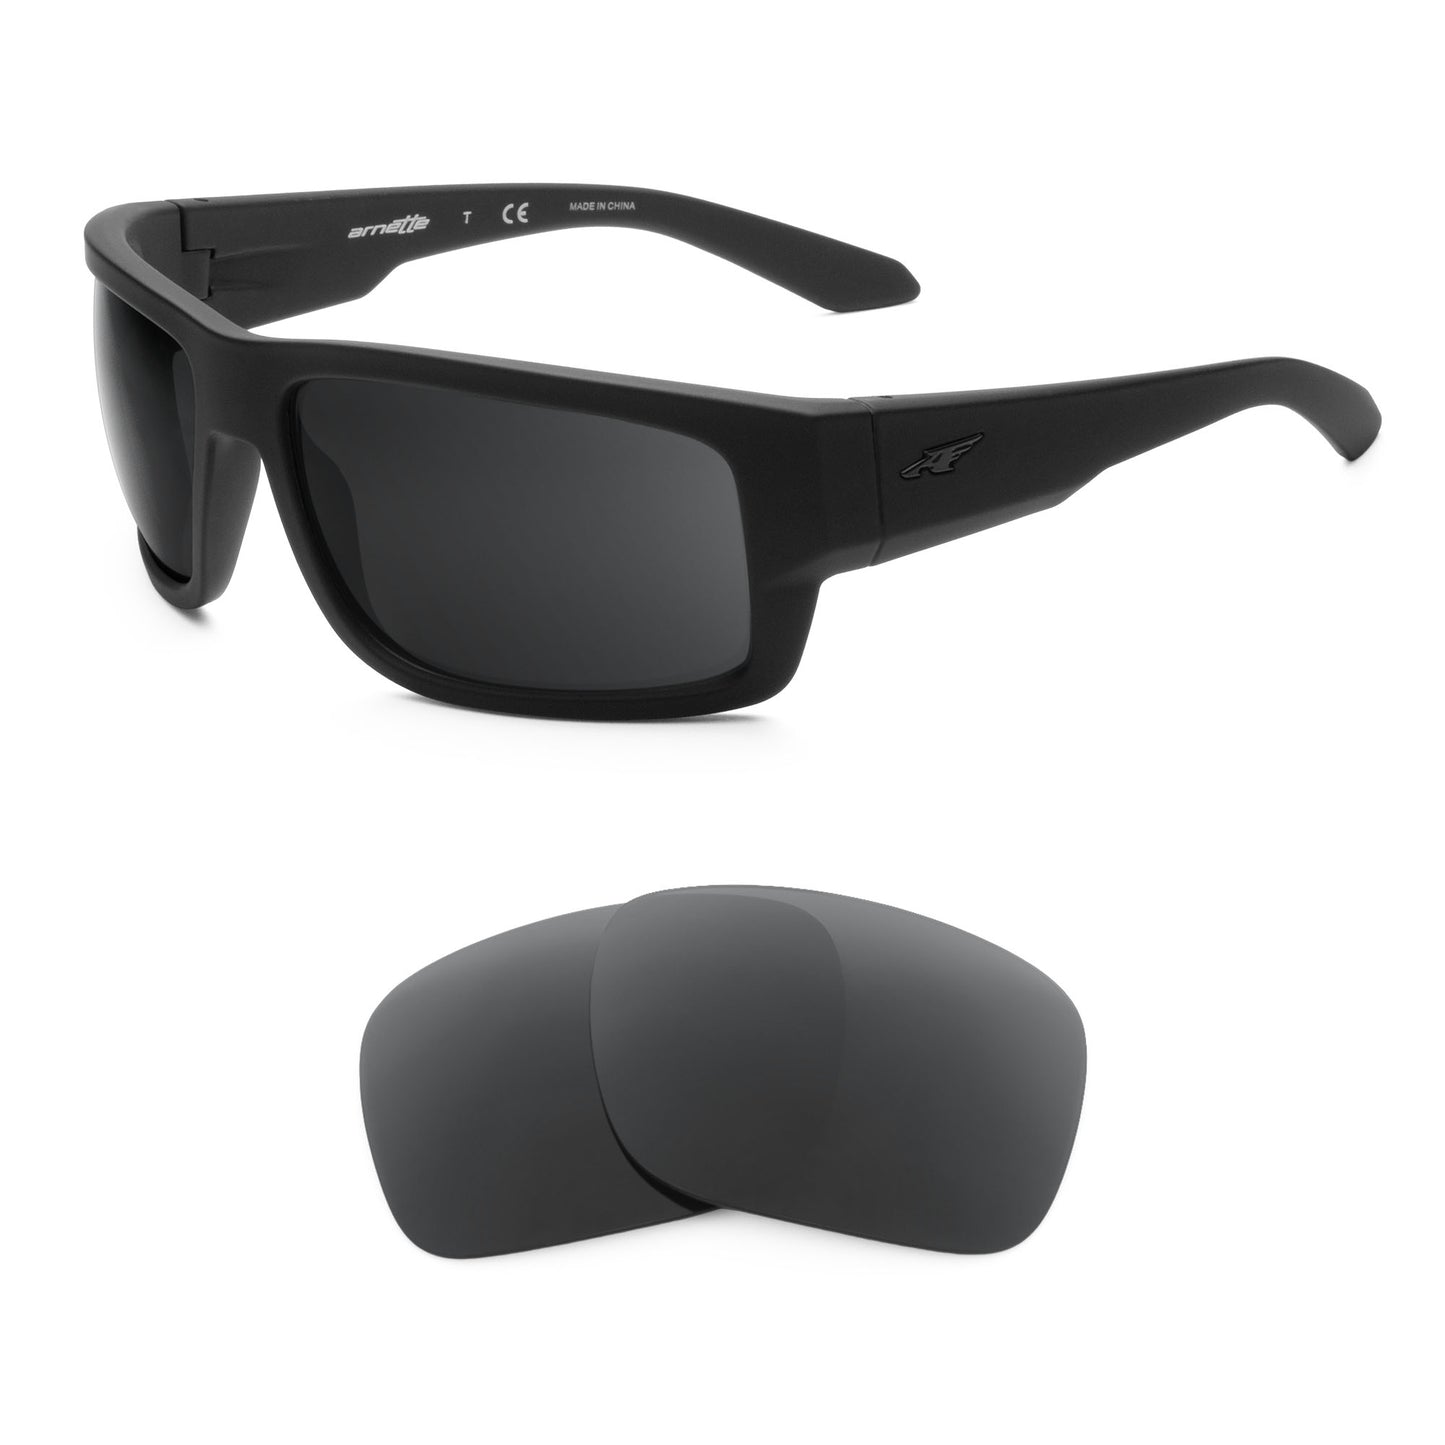 Arnette Grifter AN4221 sunglasses with replacement lenses